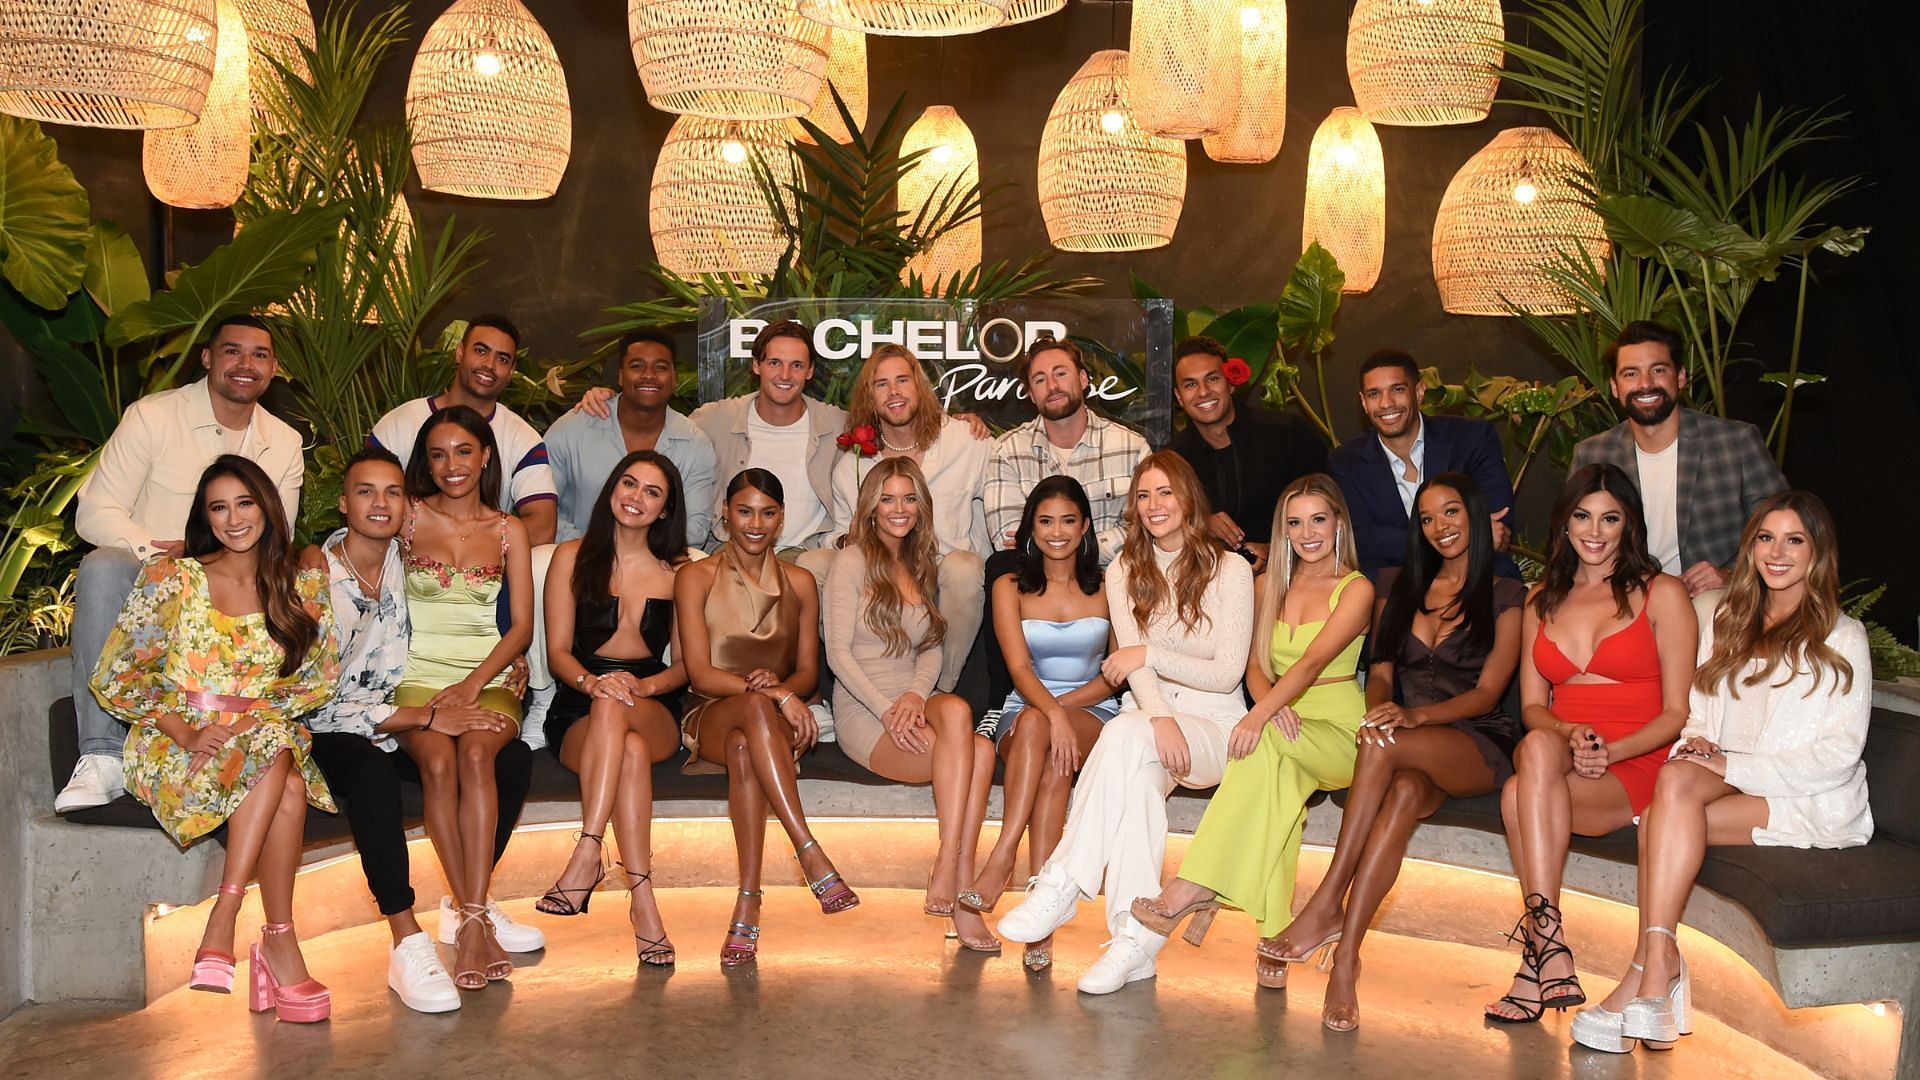 Bachelor in Paradise aired a dramatic reunion episode 